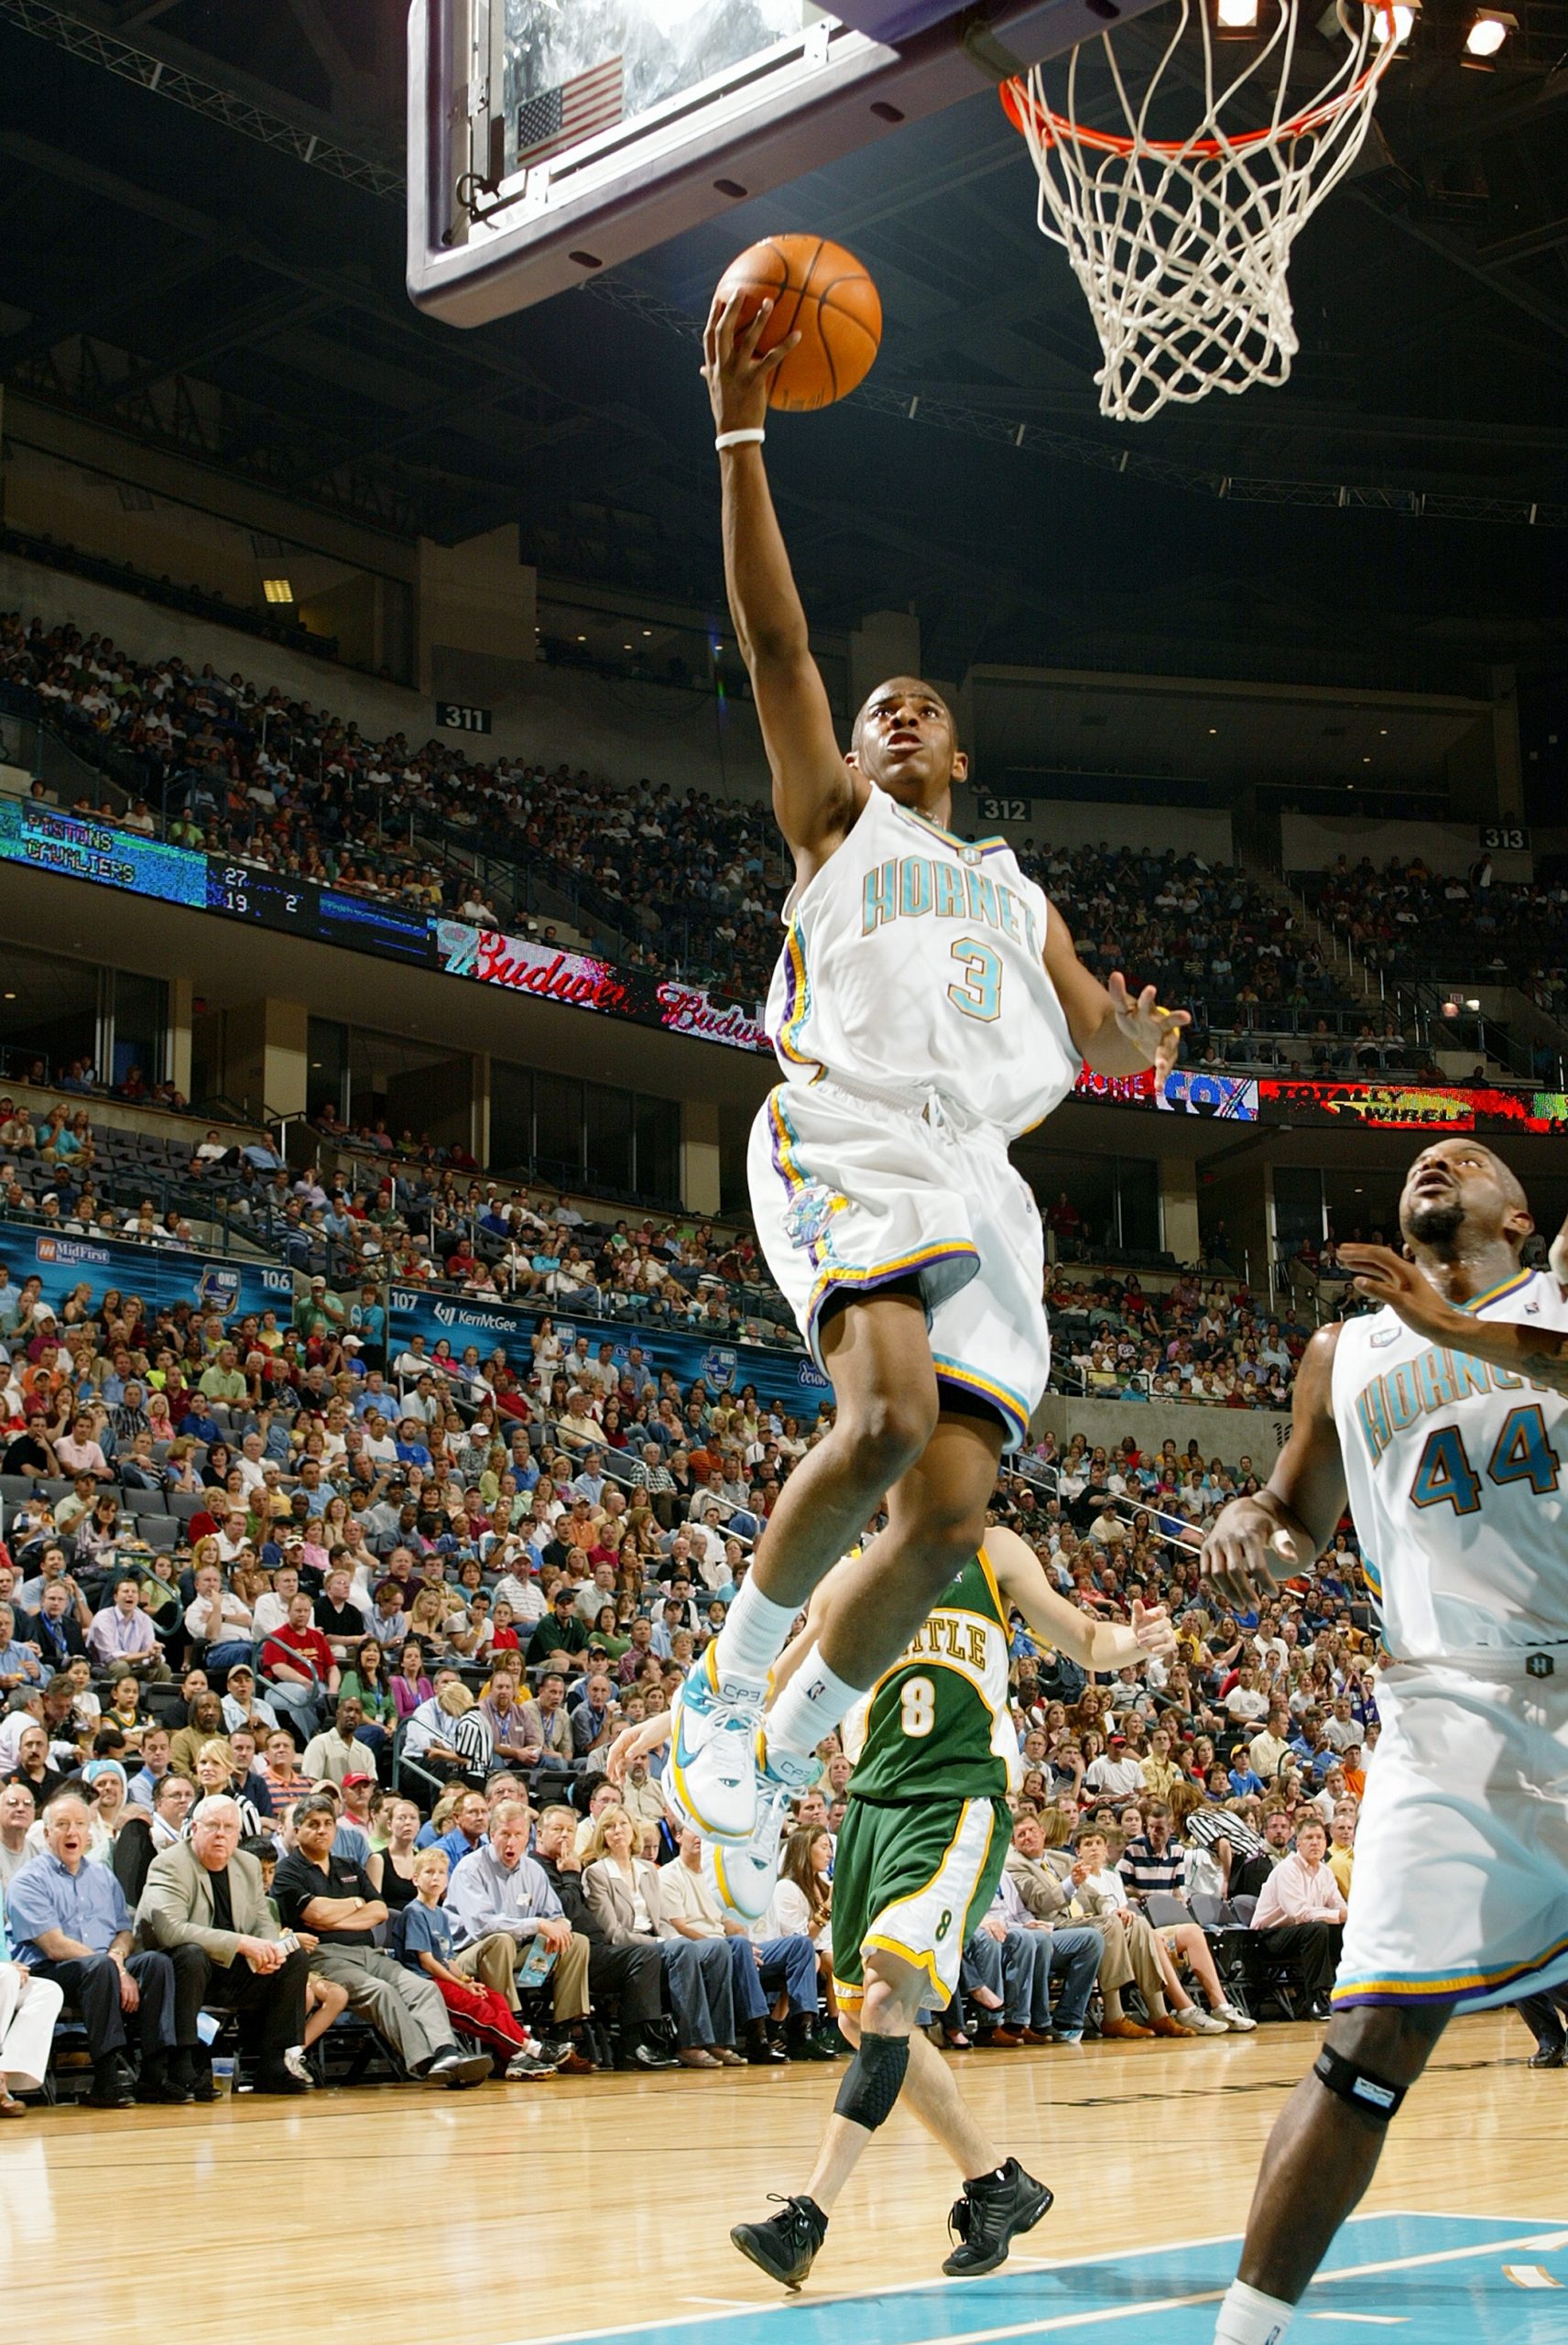 The OKC Hornets: Where are they now?